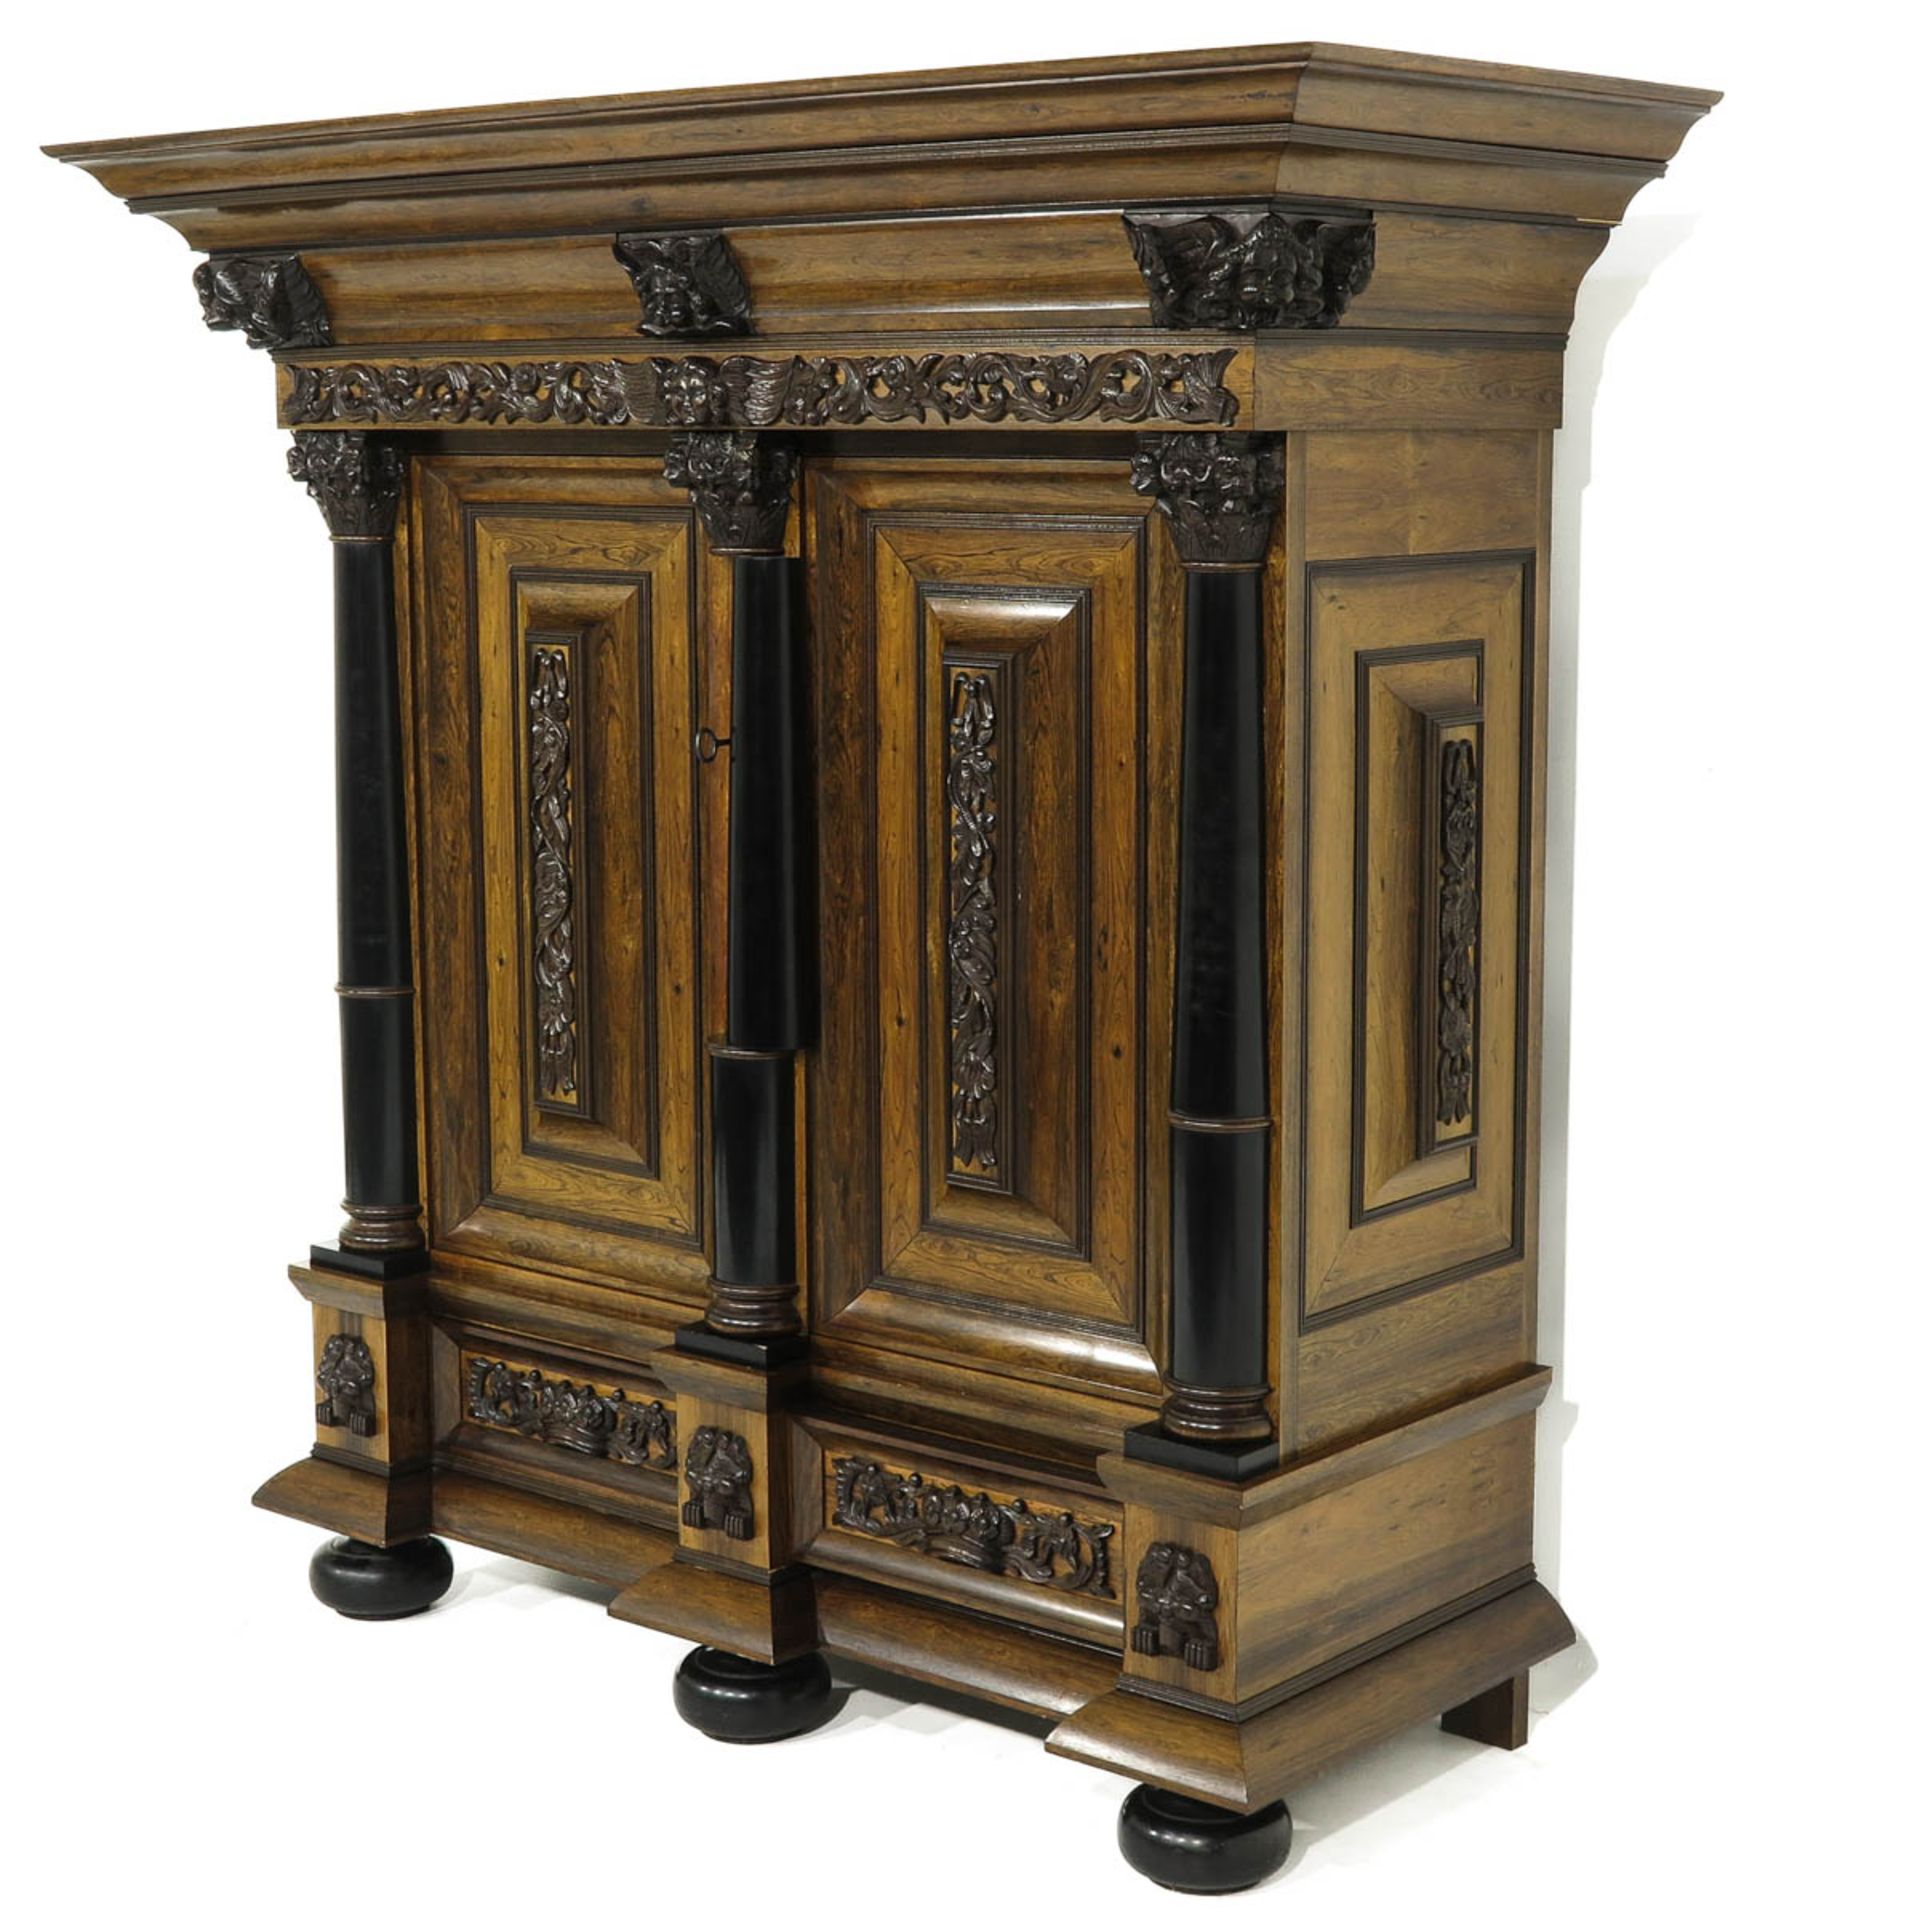 A Very Beautifully Carved Cabinet or Kussenkast - Image 3 of 10